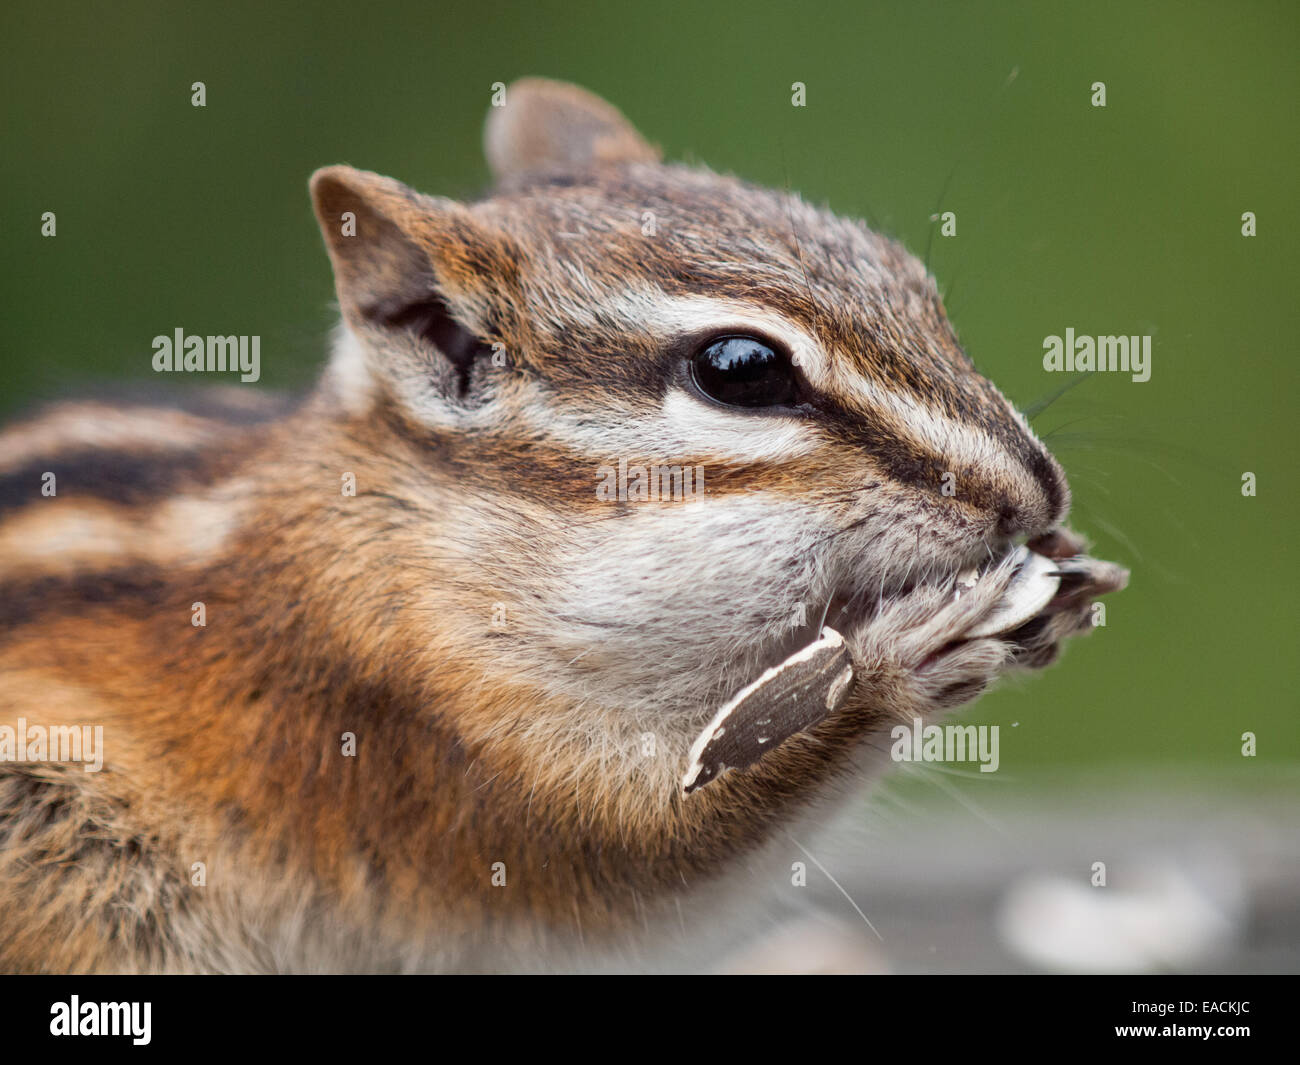 A cute Least Chipmunk (Tamias minimus) with chubby cheeks feeds on sunflower seeds. Stock Photo